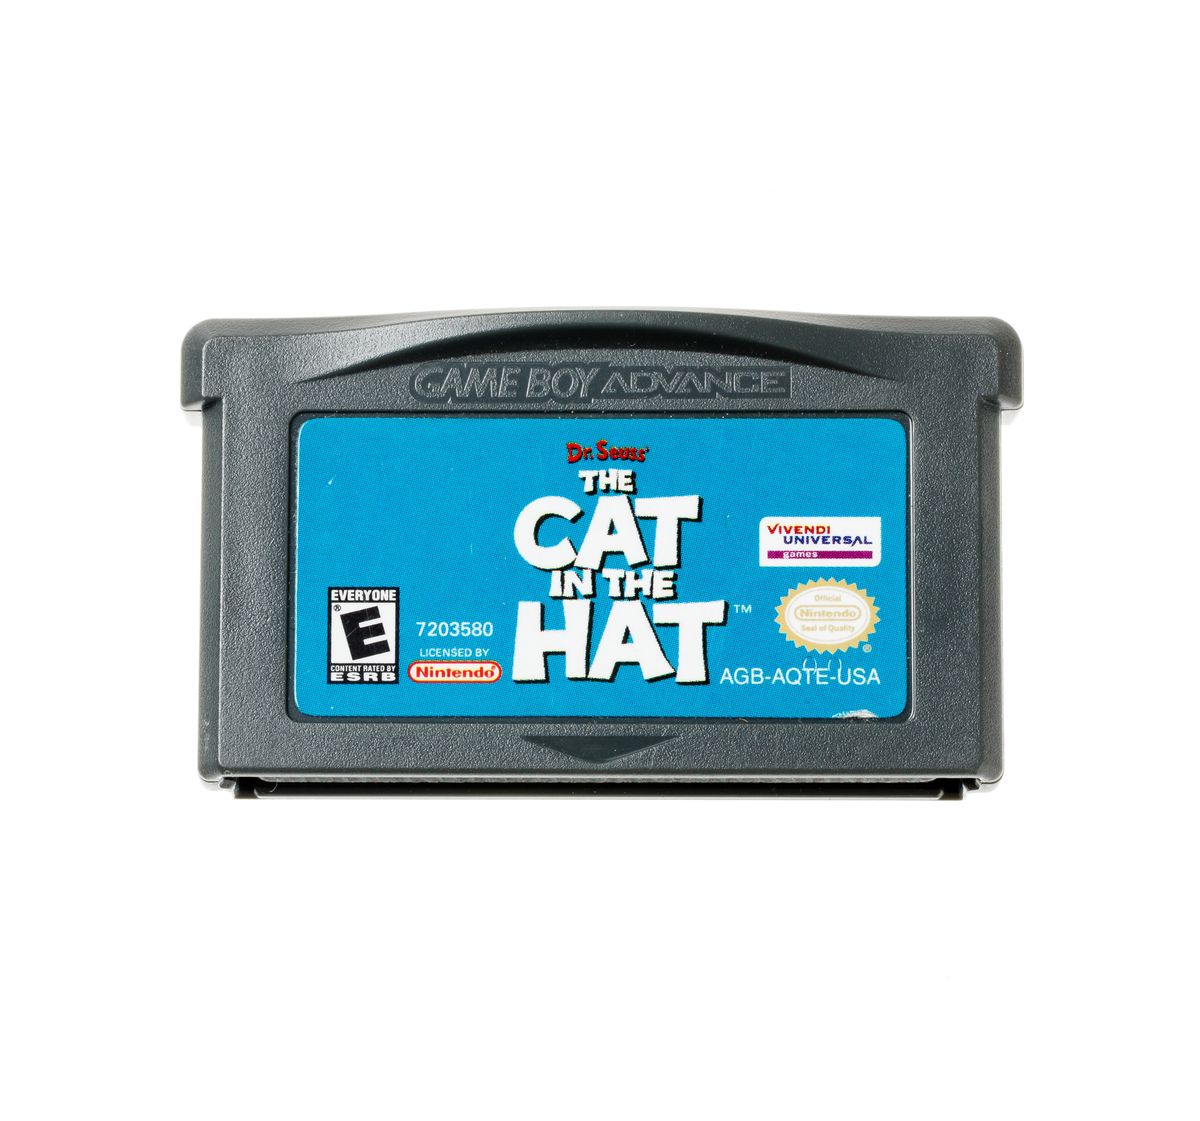 The Cat in the Hat - Gameboy Advance Games